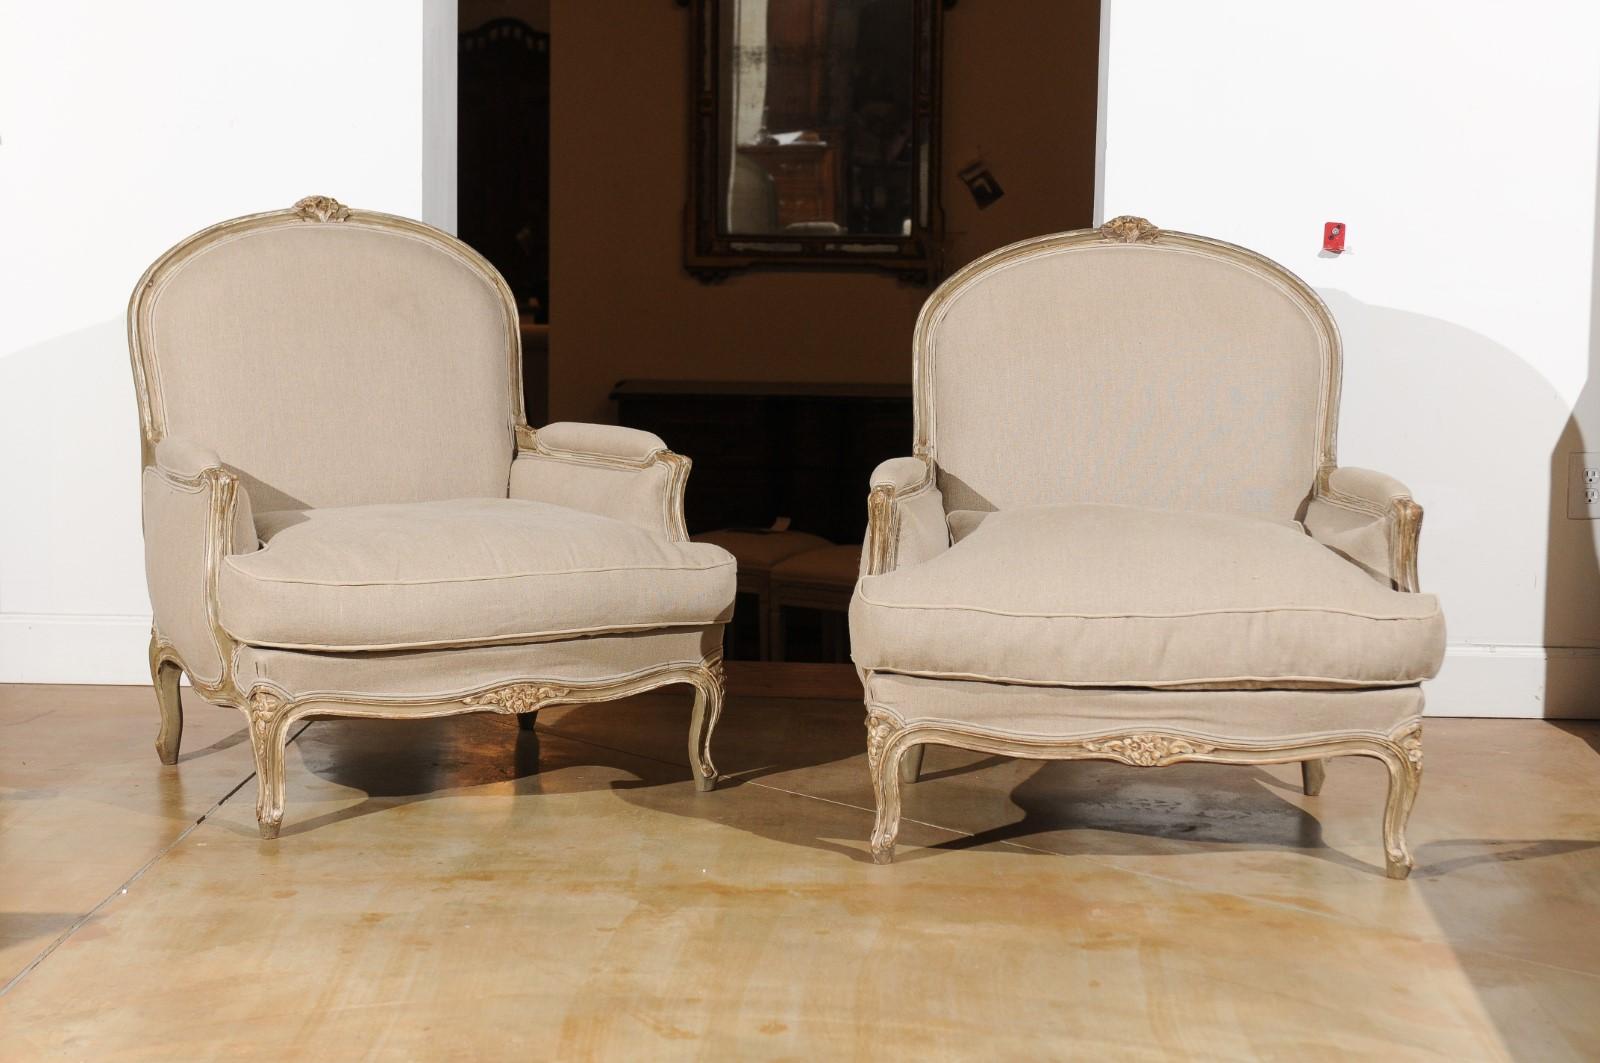 A pair of French Louis XV style painted wood marquises chairs from the 19th century, with carved crest, cabriole legs and new upholstery. Born in France during the 19th century, each of this pair of marquises presents the stylistic characteristics